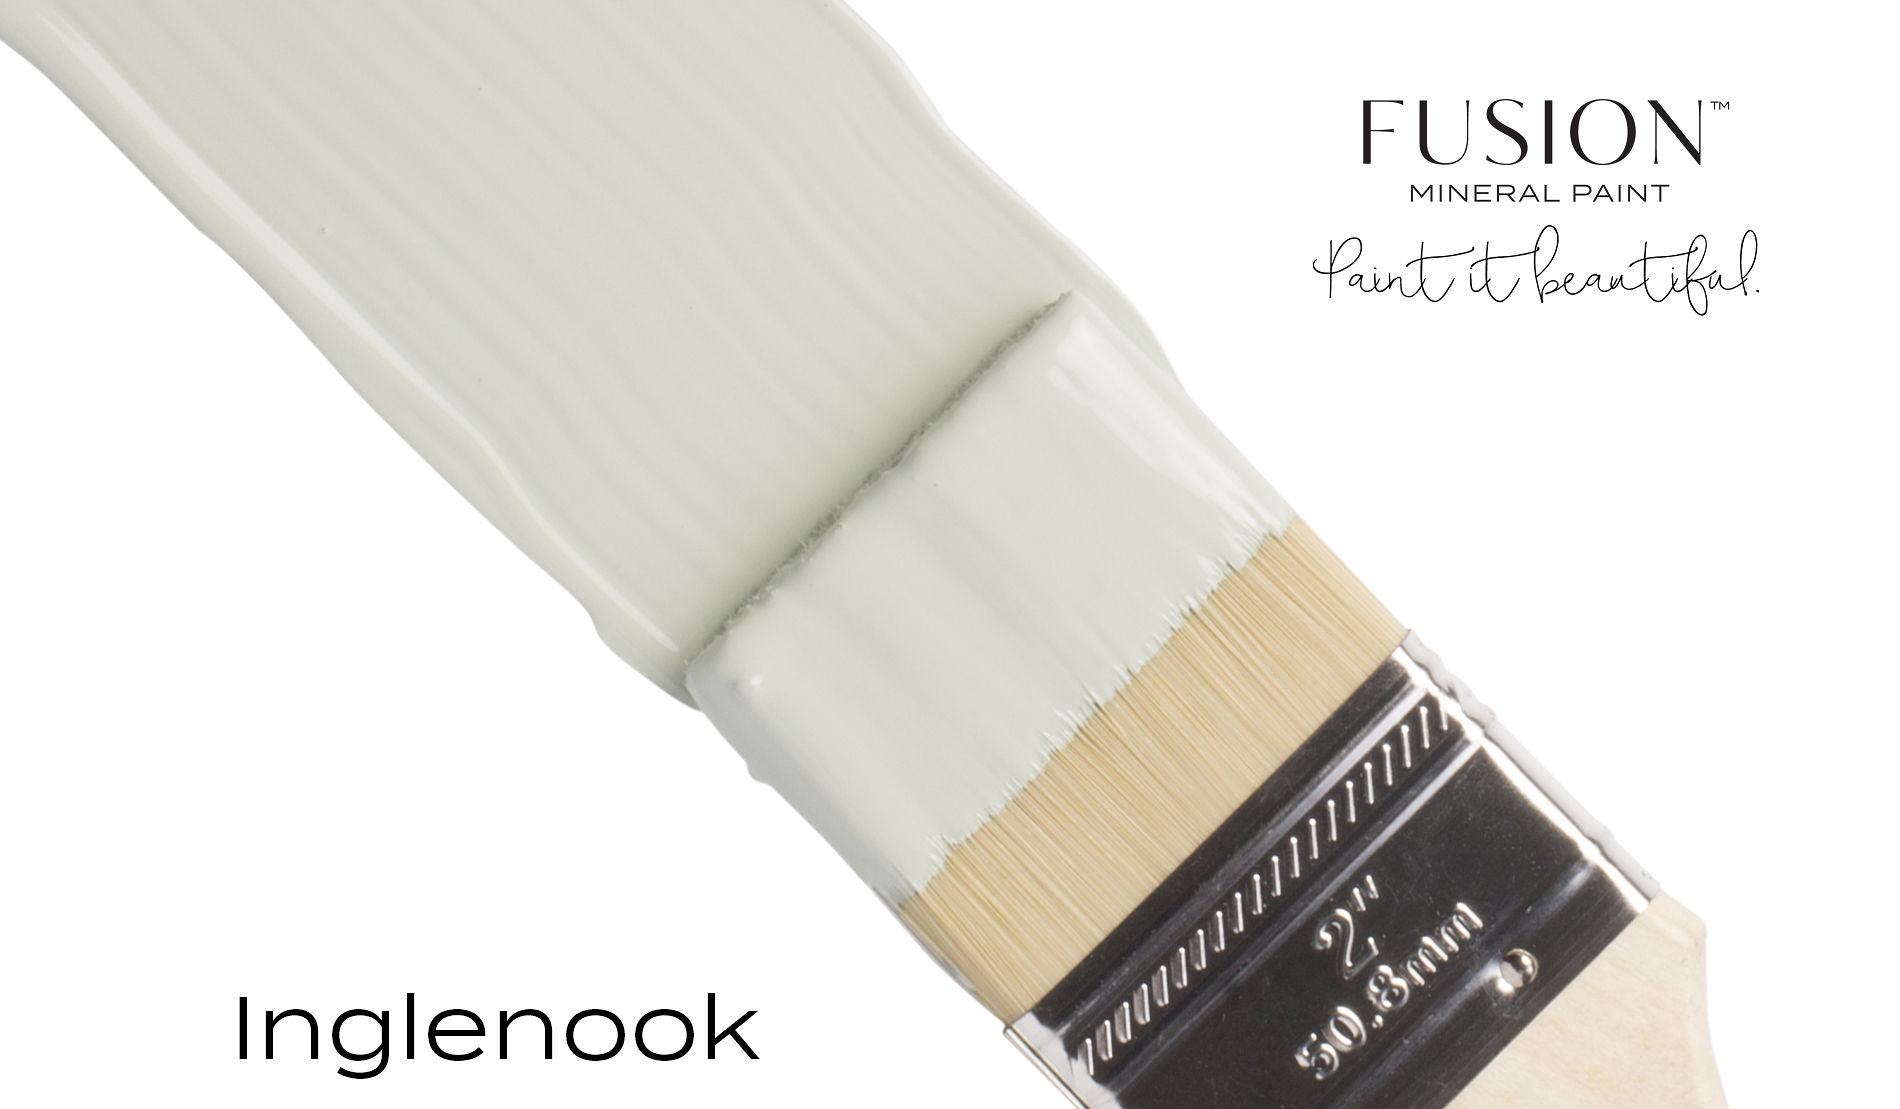 Ingenook Fusion Mineral Paint Goed Gestyled Brielle